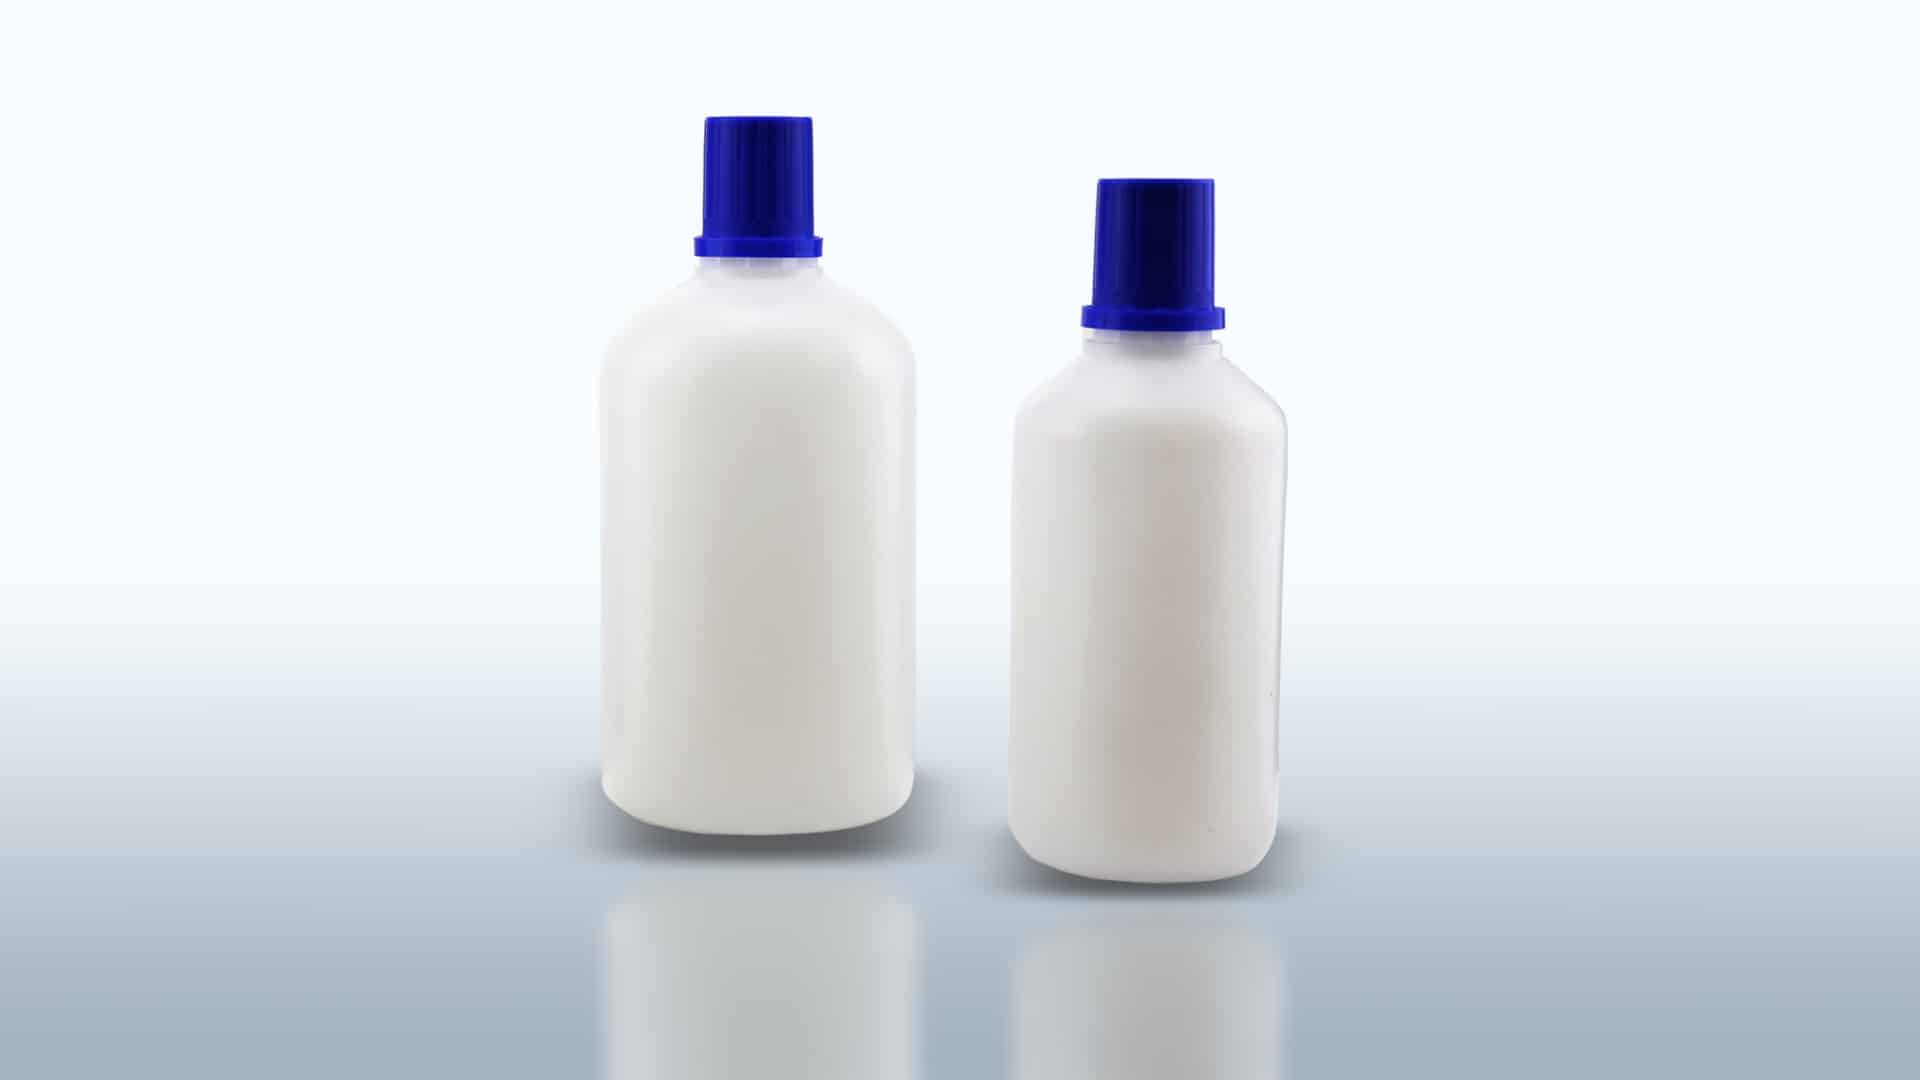 Hpde diagnostic containers. standard bottle capacity ml 500, ml 1000. screw cap with tamper evident.